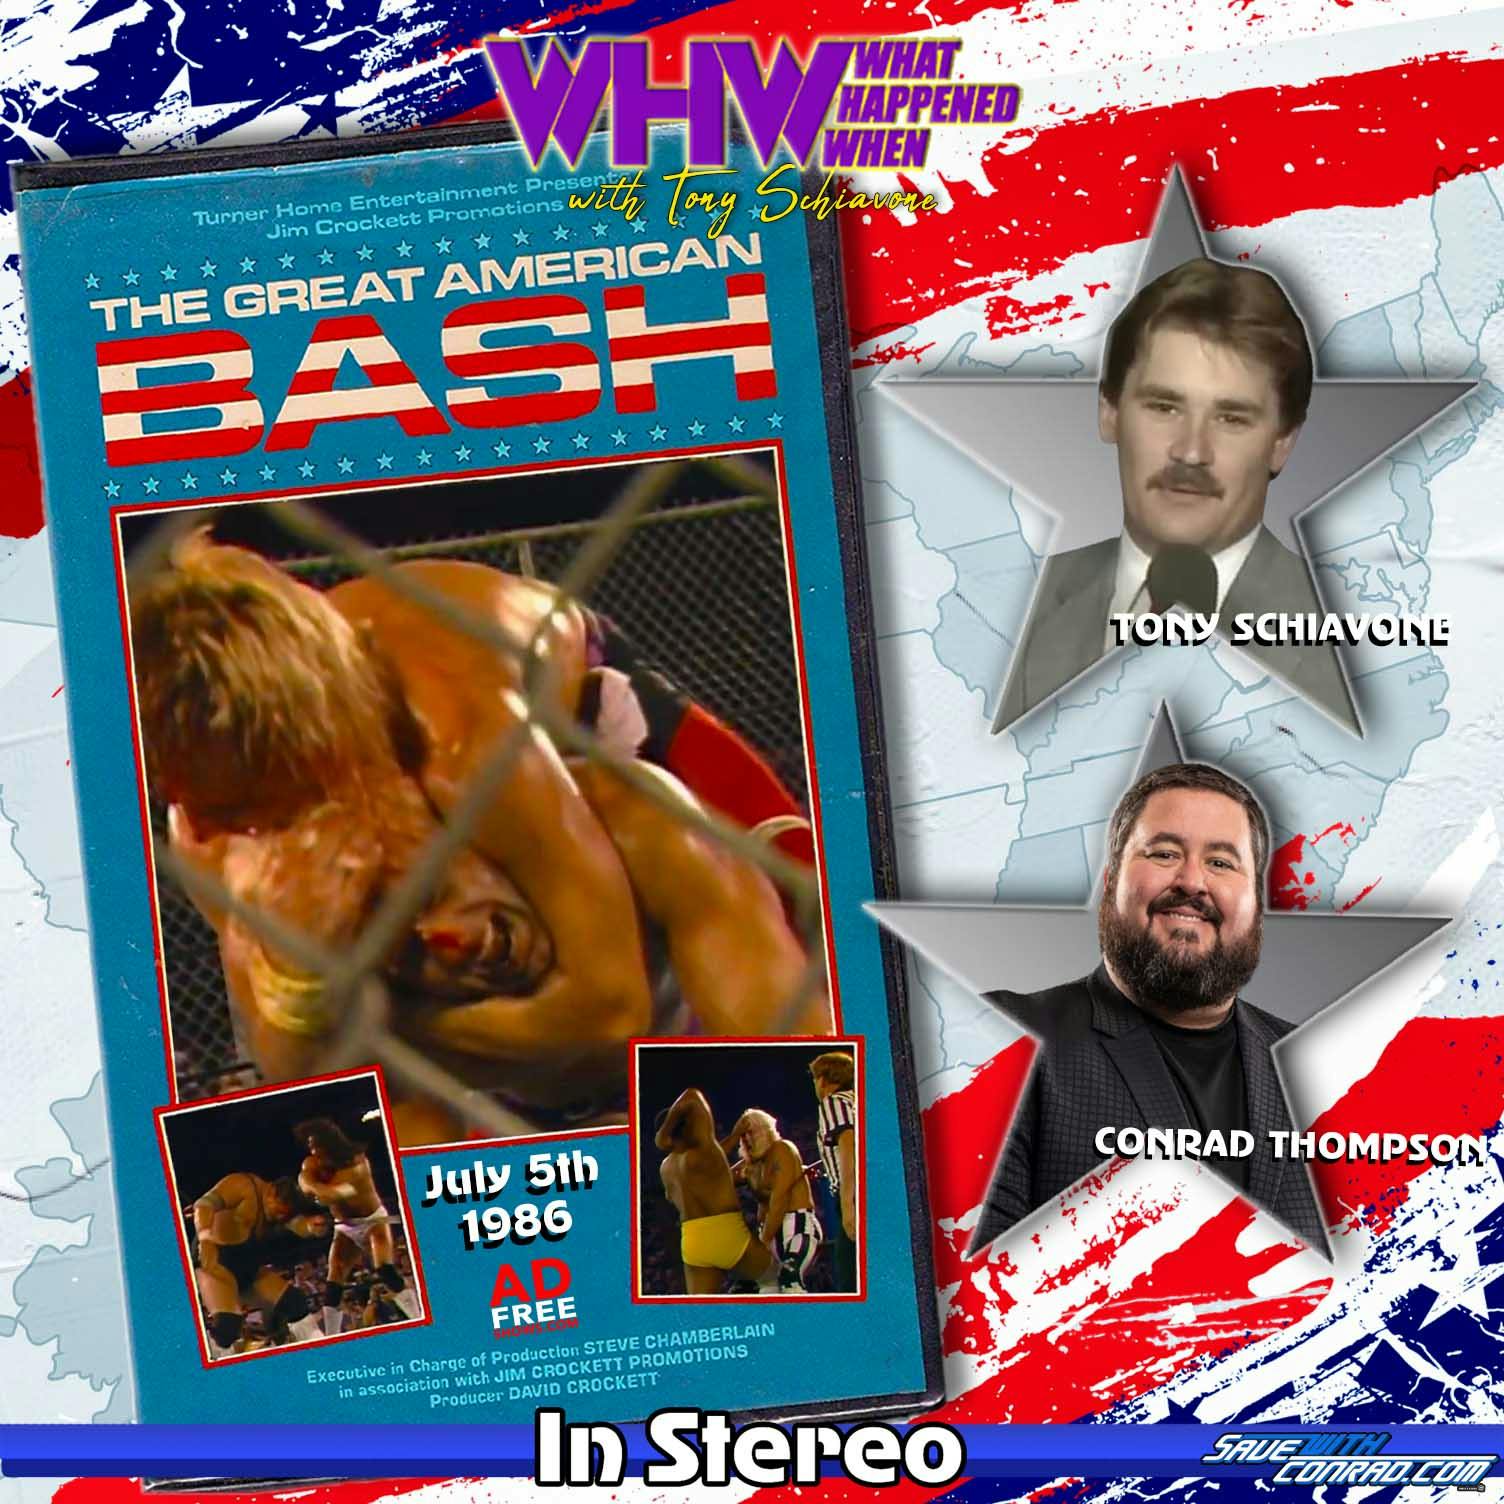 Episode 236:  The Great American Bash 07-05-1986